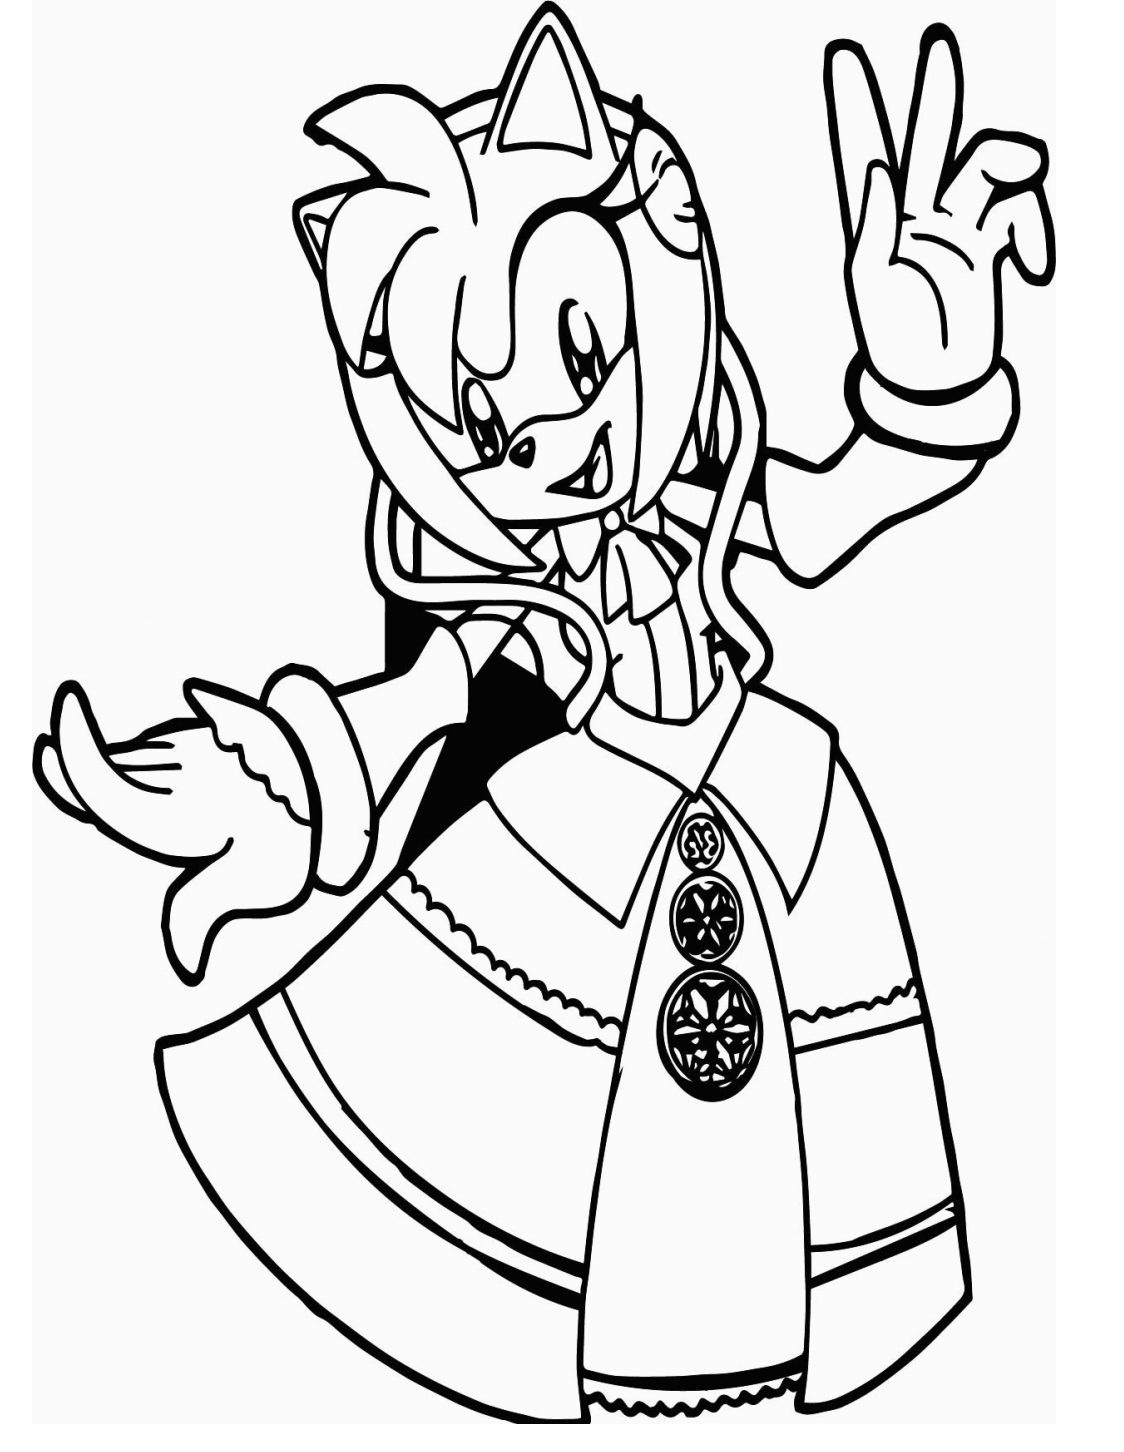 Beautiful Amy Rose Wearing Dress Coloring Page - Free Printable Coloring Pages for Kids